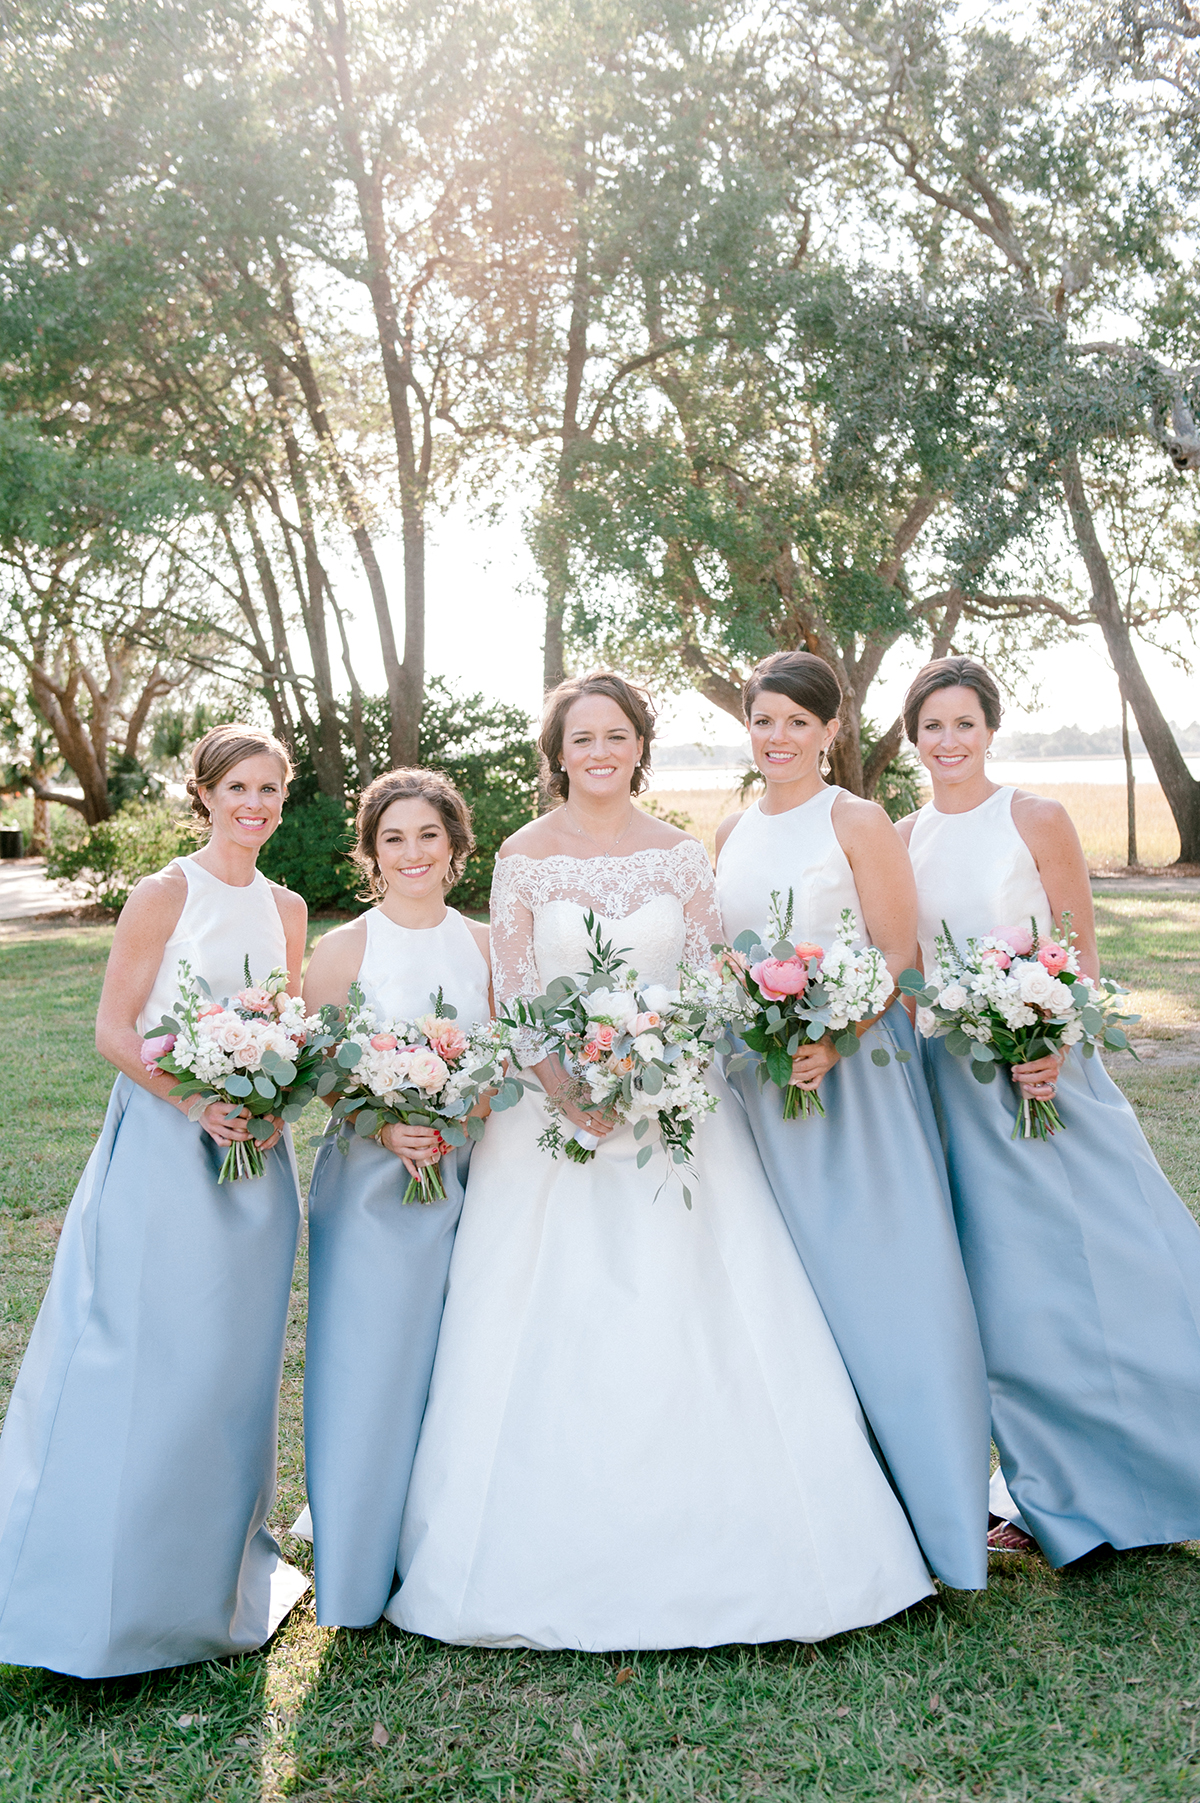 Bridesmaids in White and Blue Dresses